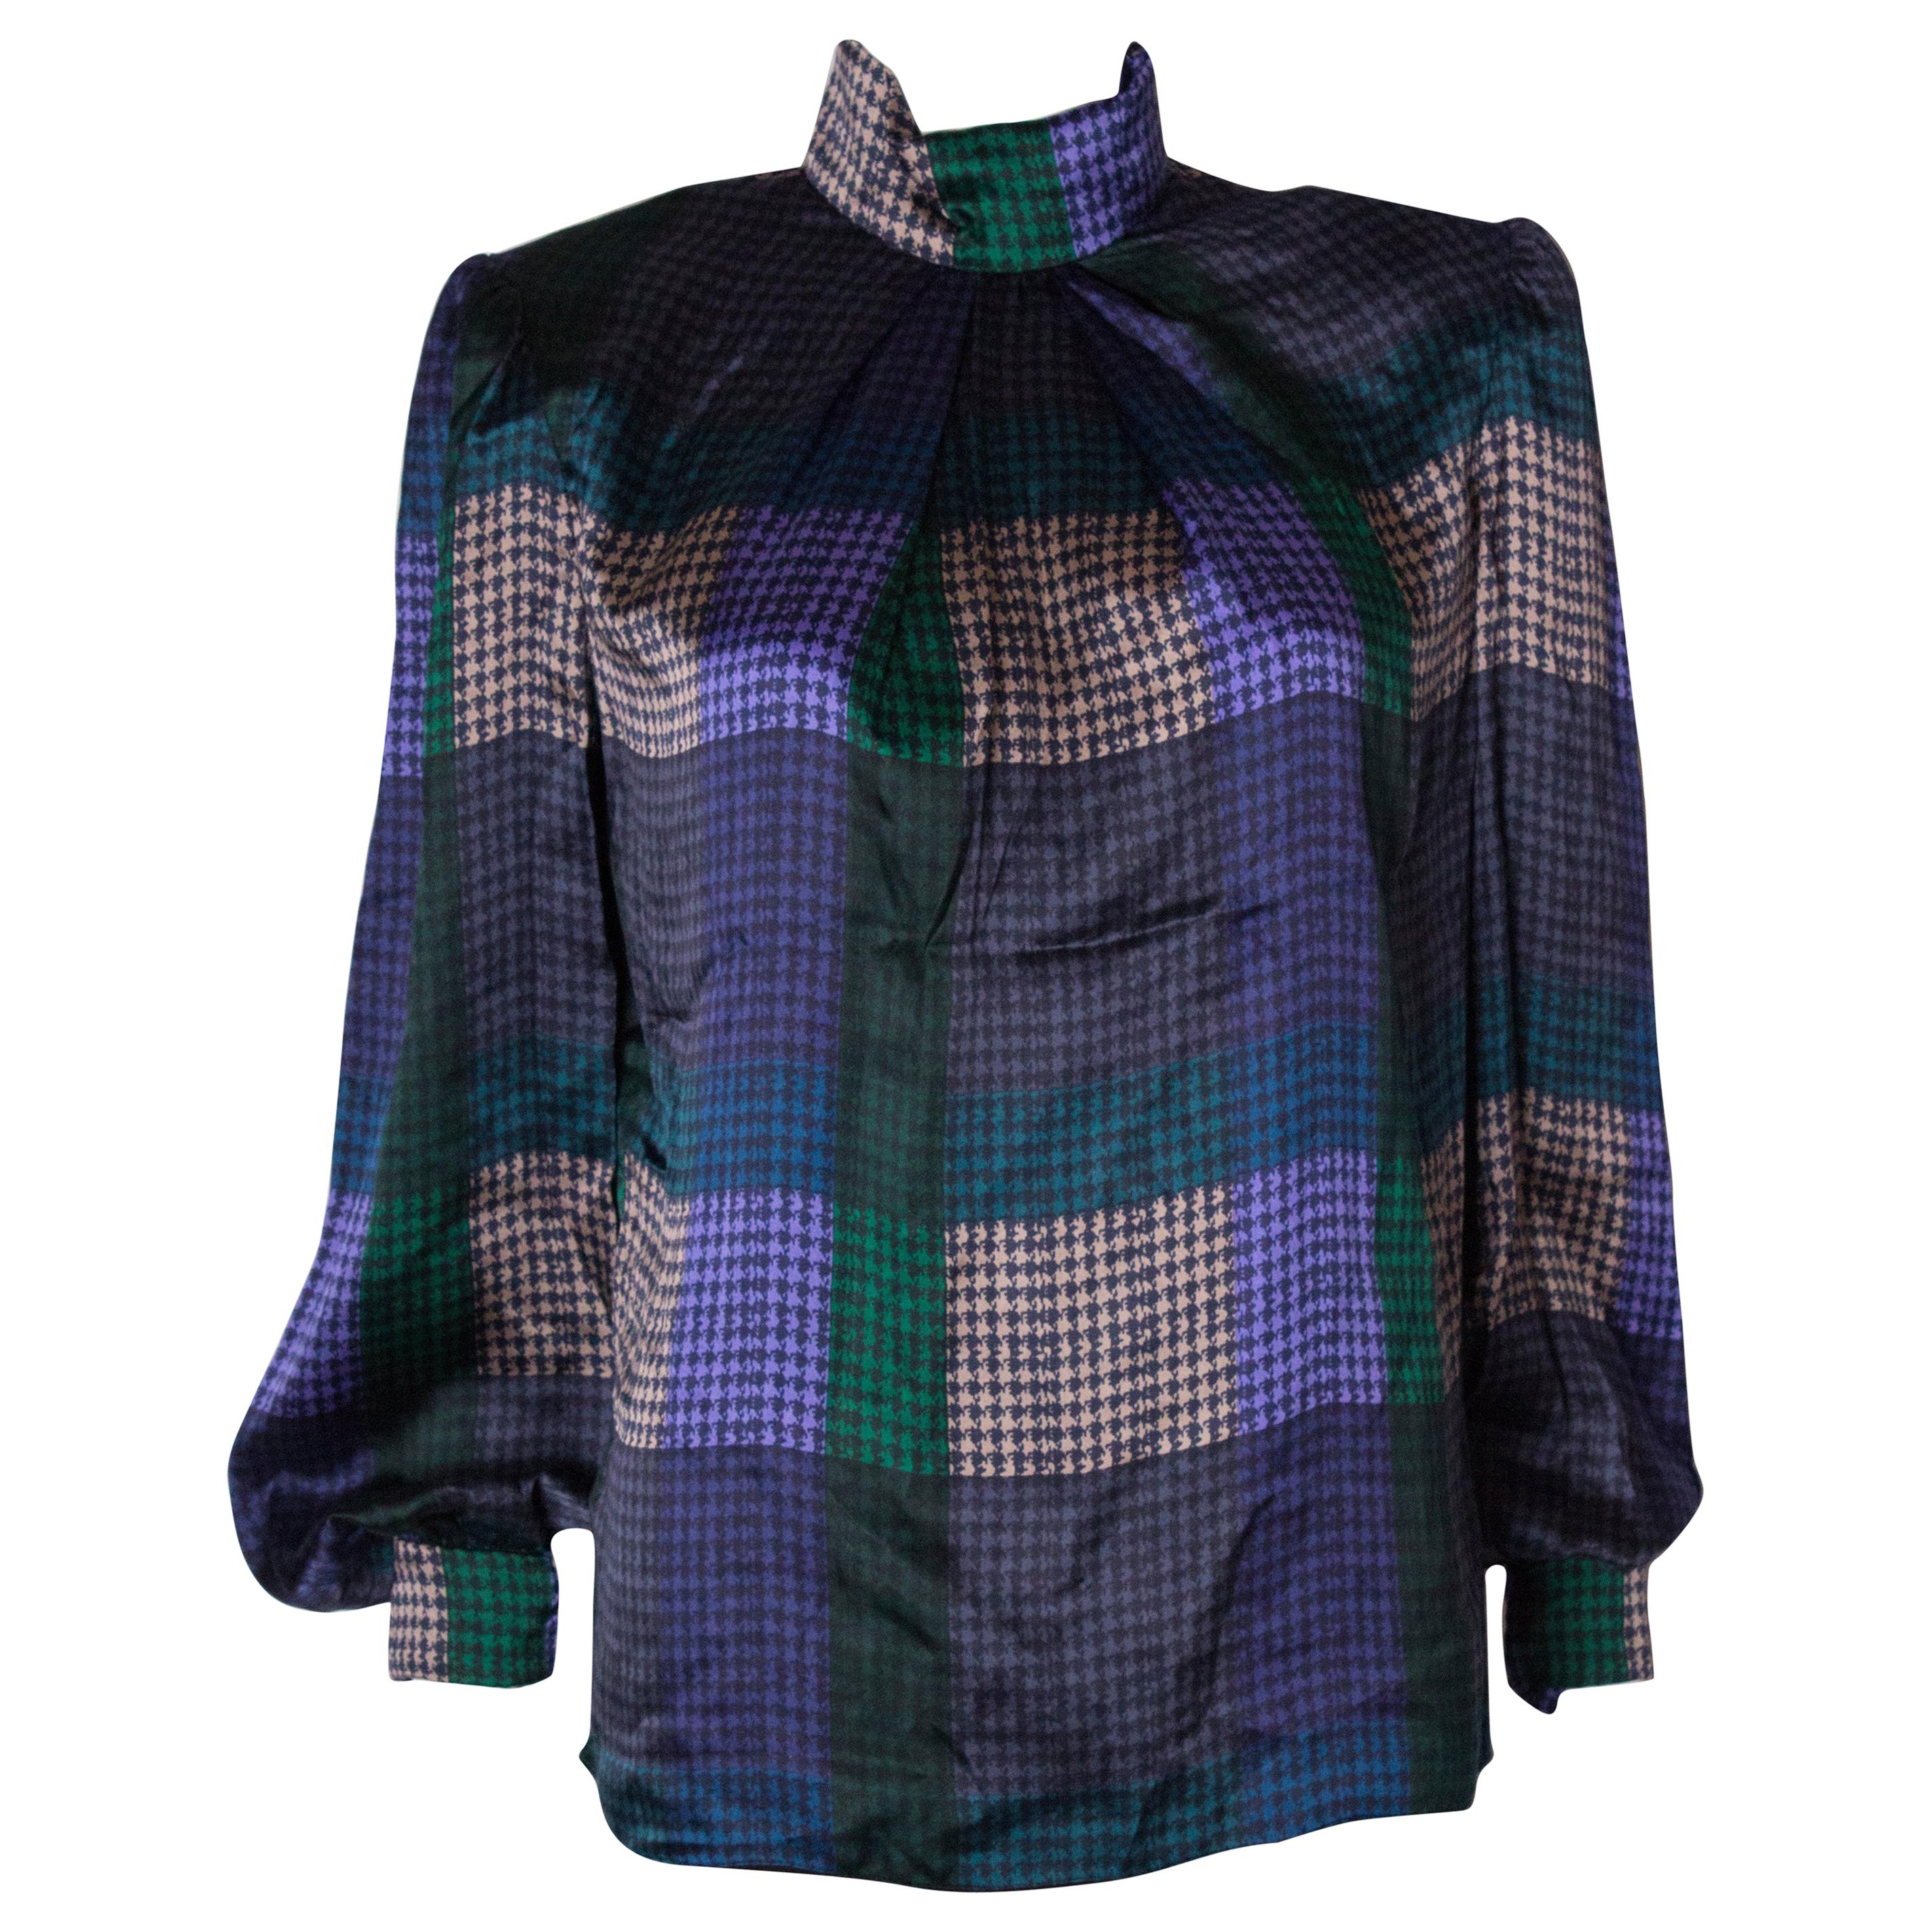  Vintage  Multicolour Silk Blouse by Donald Campbell For Sale